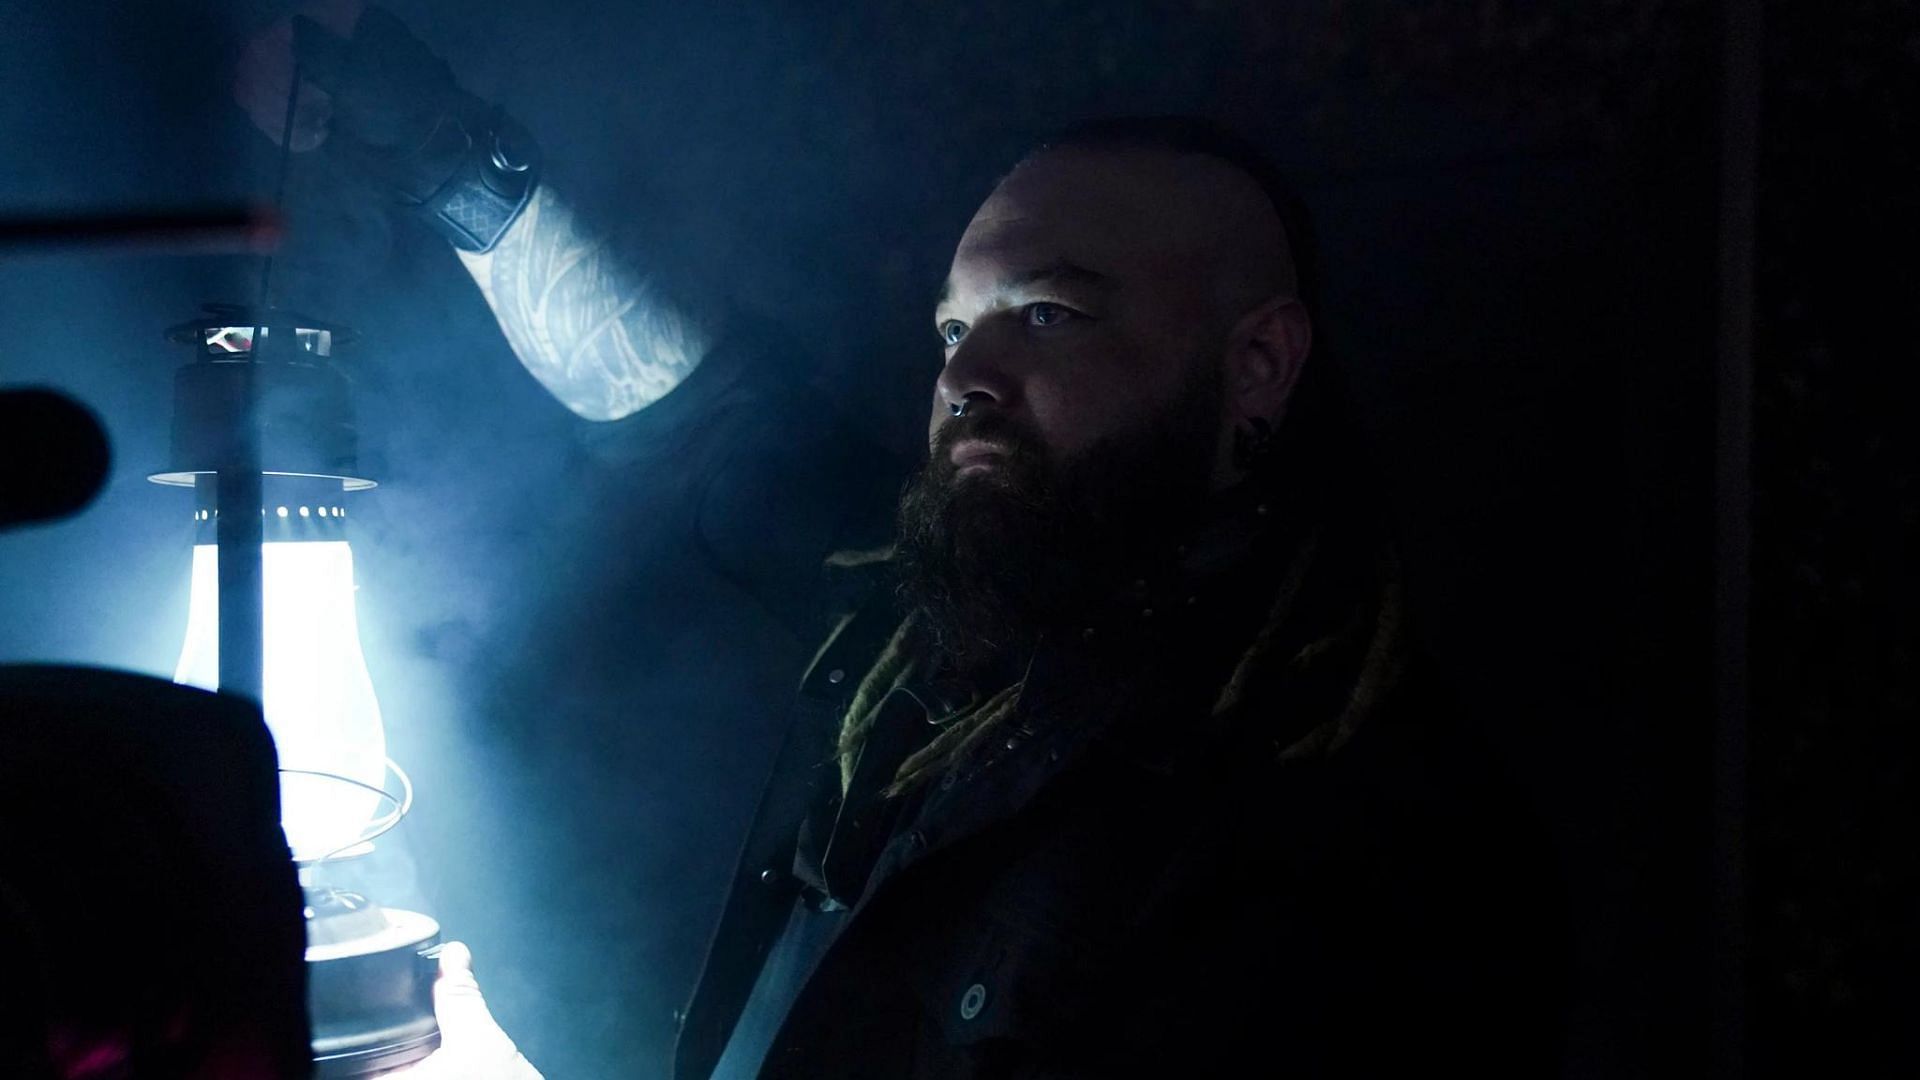 Bray Wyatt made his return at Extreme Rules 2022